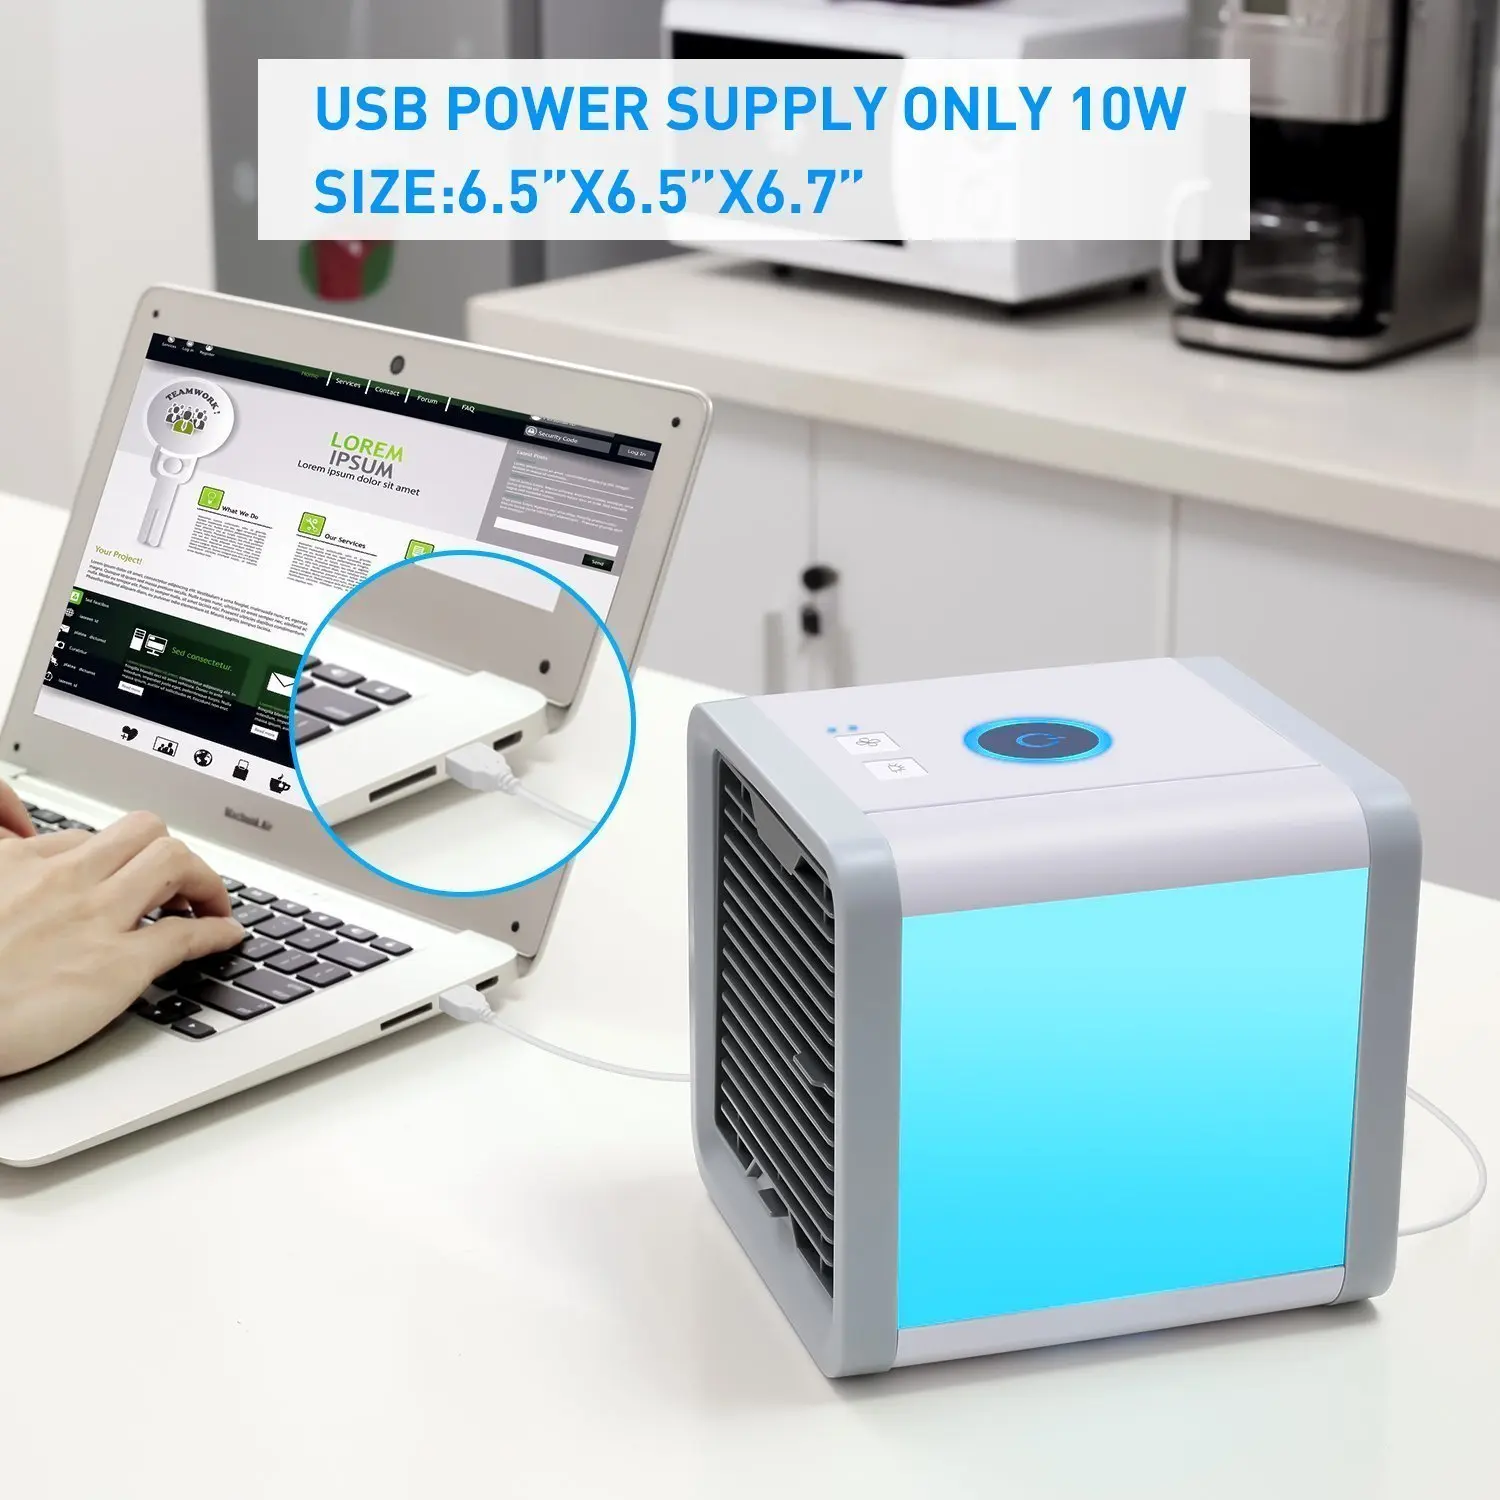 Portable USB Air Conditioner Unit - Mini 3 Speed Air Cooler Humidifier AC Water Fan